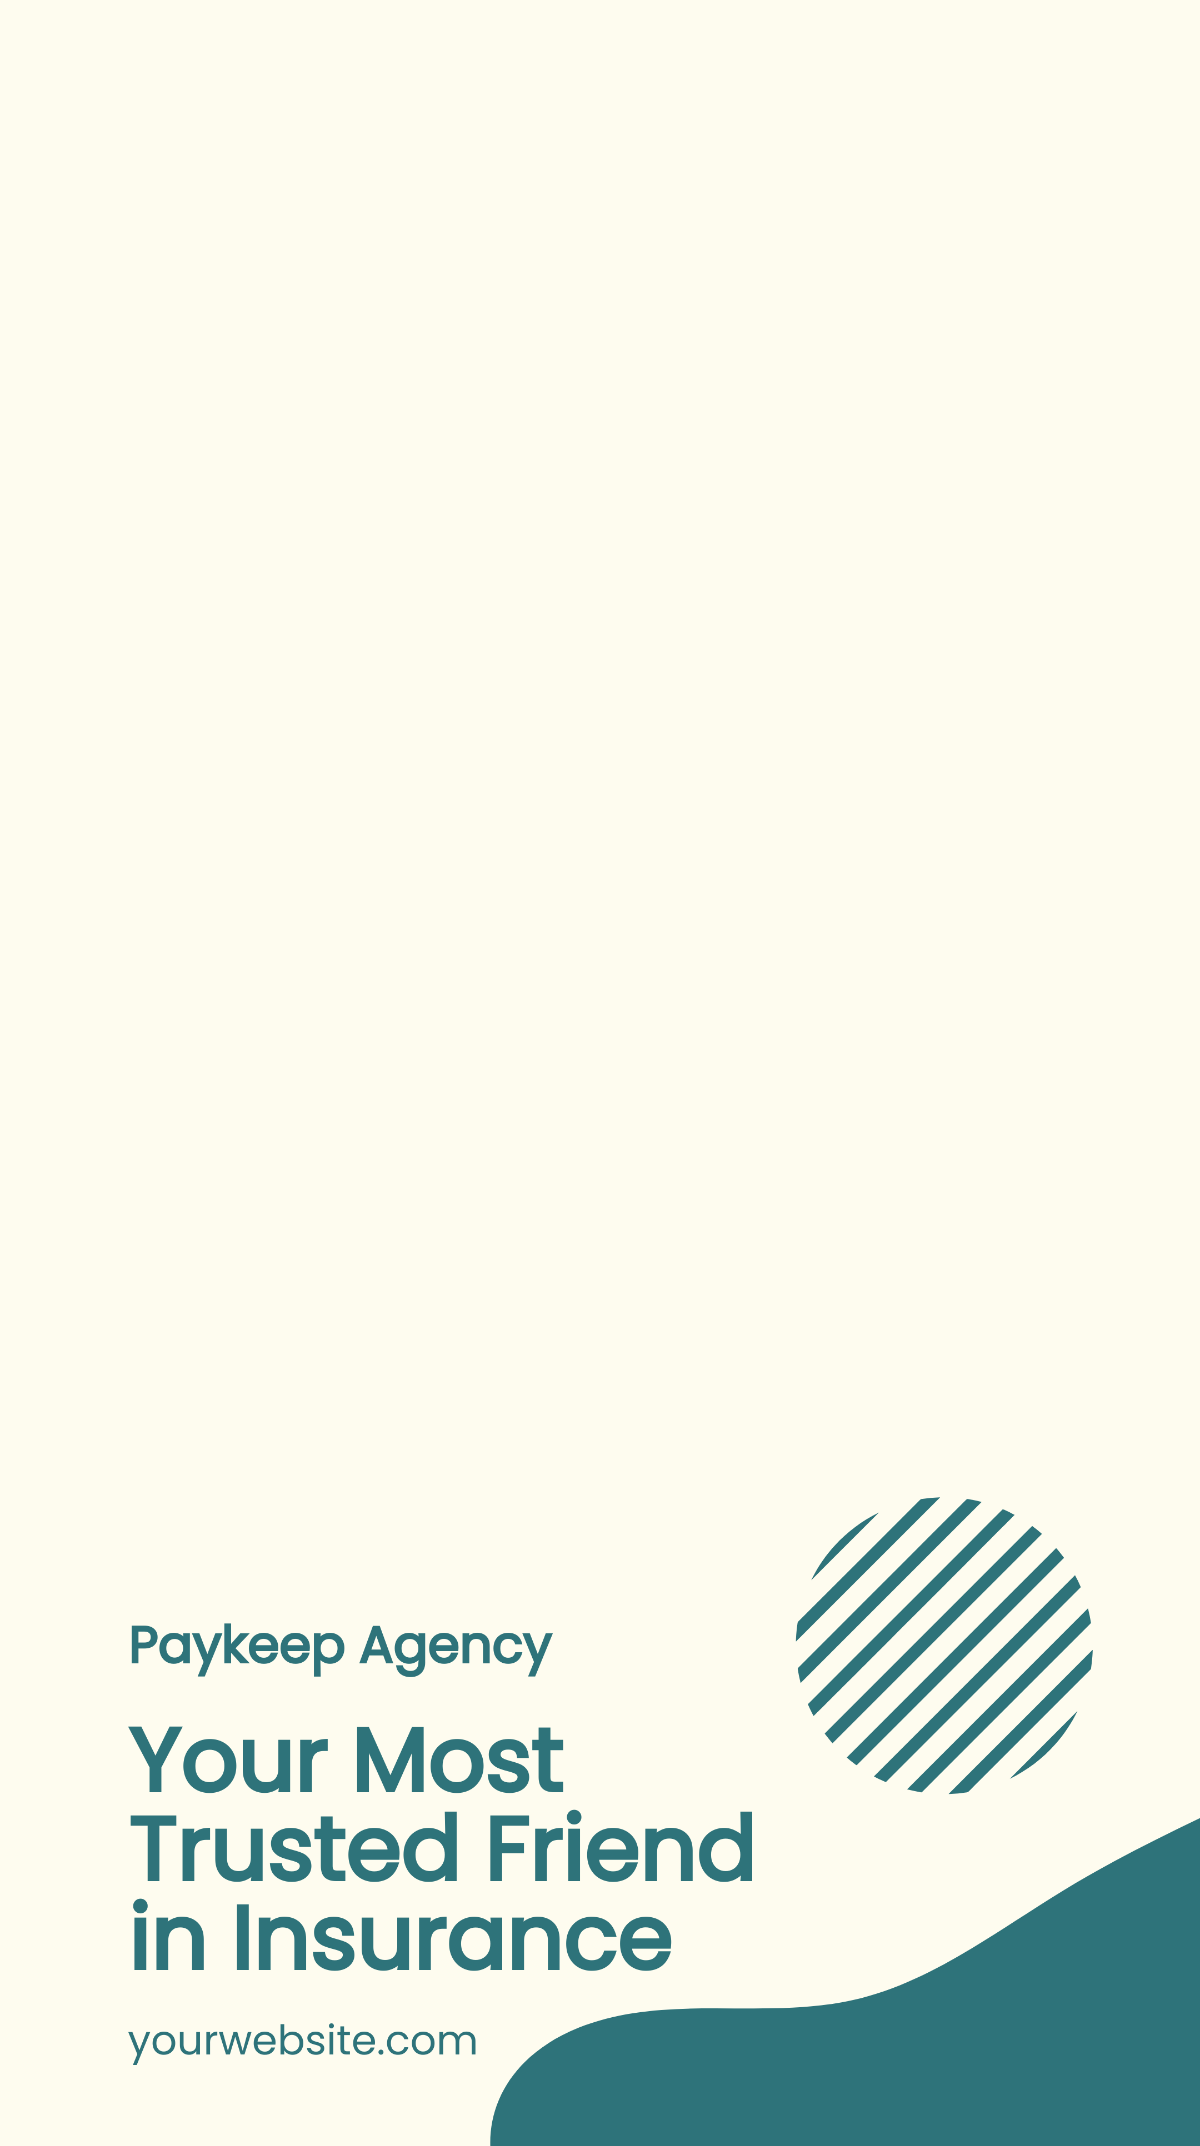 Free Insurance Agency Snapchat Geofilter Template